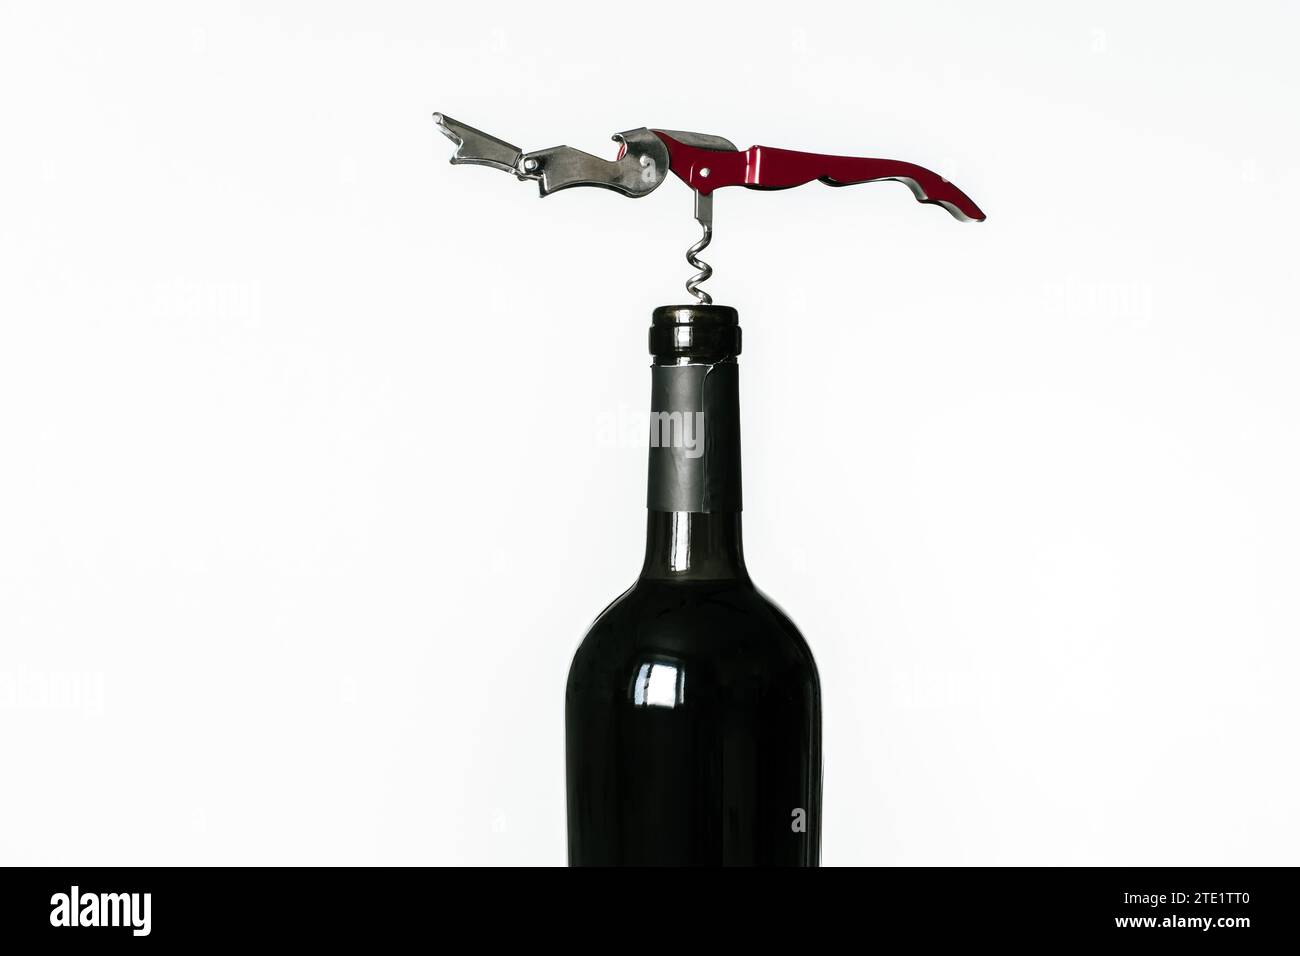 Corkscrew screwed into the cork of a bottle of red wine isolated on a white background Stock Photo